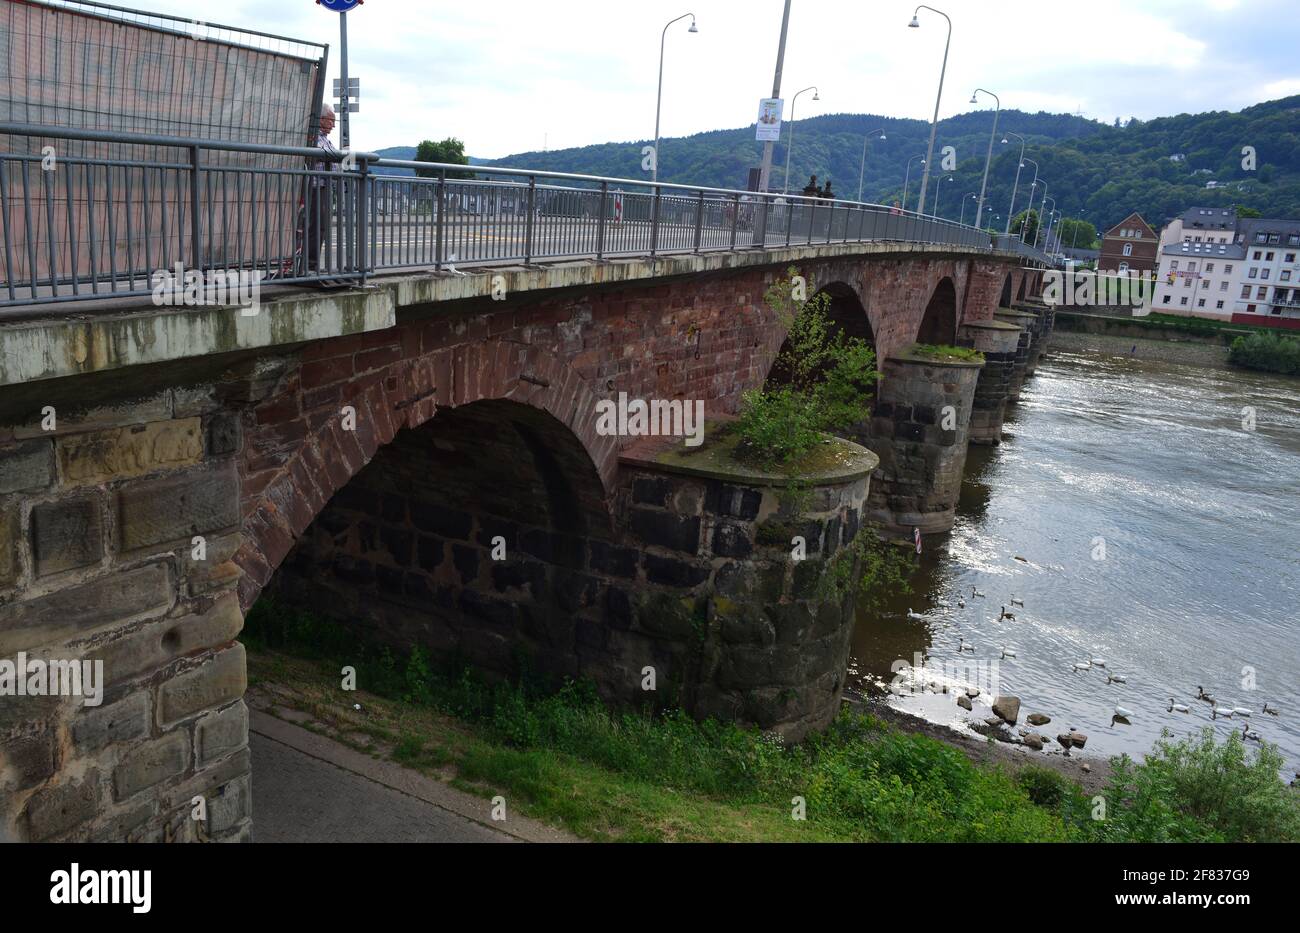 A view of the Römerbrücke, ancient Roman times bridge over the Mosel river, Trier, Germany Stock Photo